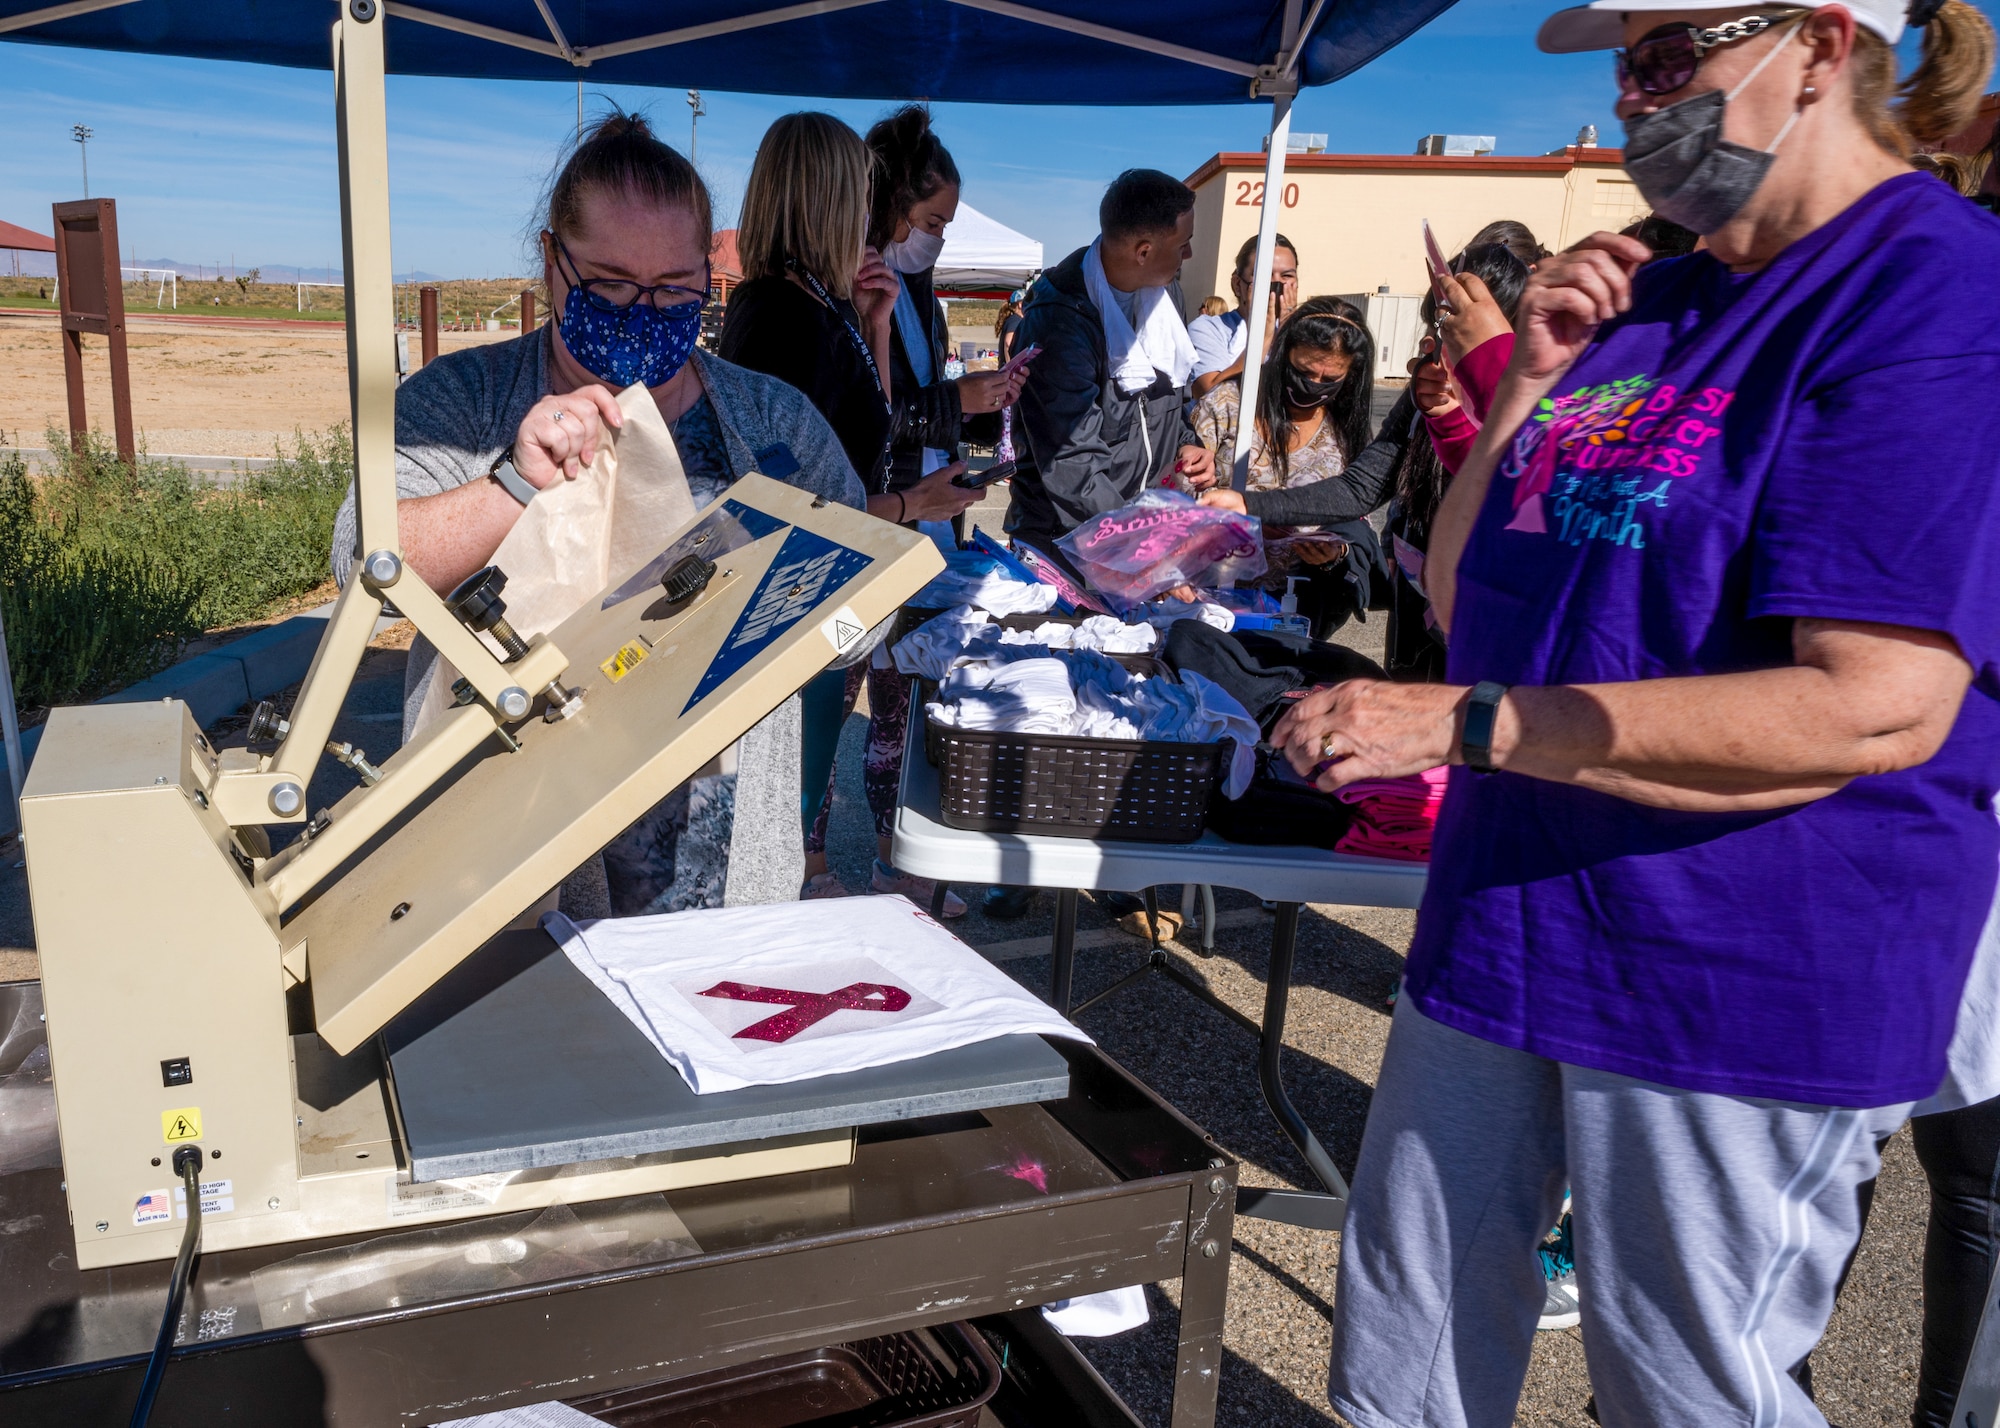 Airmen and civilians came out to the 5K Run/Walk and Mini Health Fair in support of Breast Cancer Awareness Month at the Rosburg Fitness Center on Edwards Air Force Base, California, Oct. 20. The first 50 participants received free T-shirts with the ubiquitous pink ribbon symbol for breast cancer. (Air Force photo by Katherine Franco)